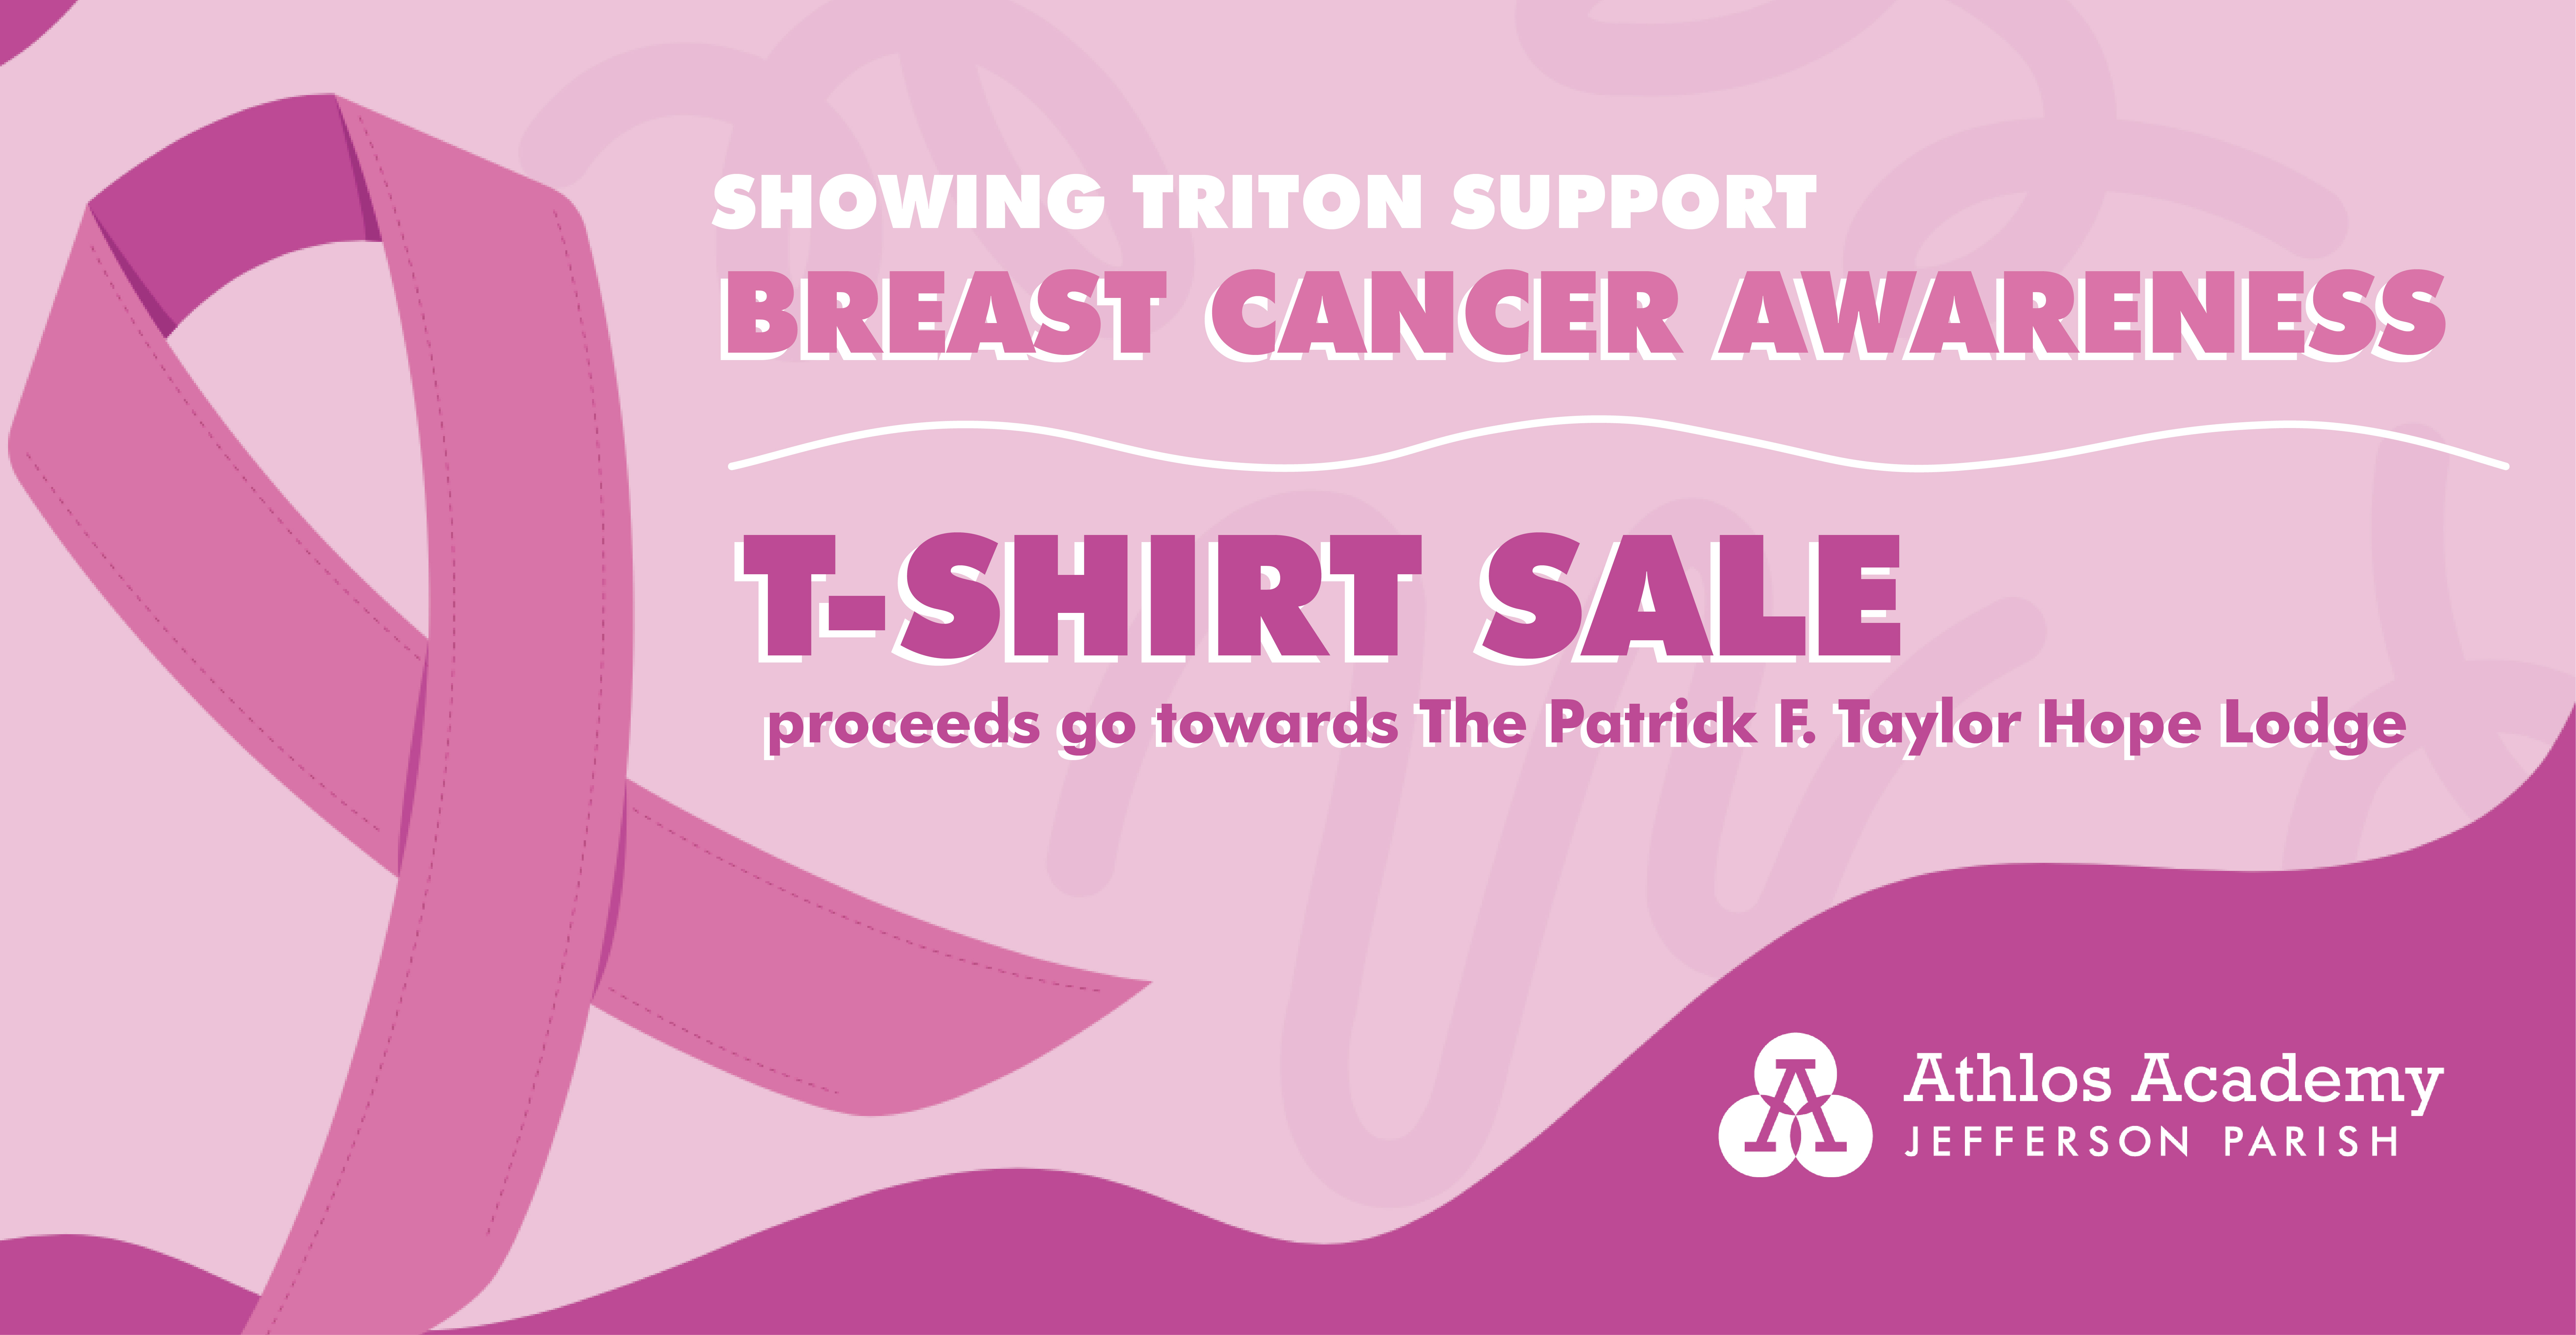 Support Breast Cancer awareness by ordering your t-shirts today at a price of $15, and contribute to The Patrick F. Taylor Hope Lodge as all sales proceeds will be donated to them. Remember to place your order no later than Friday, September 2023 at noon. Extra order forms can be found by visiting the front office.